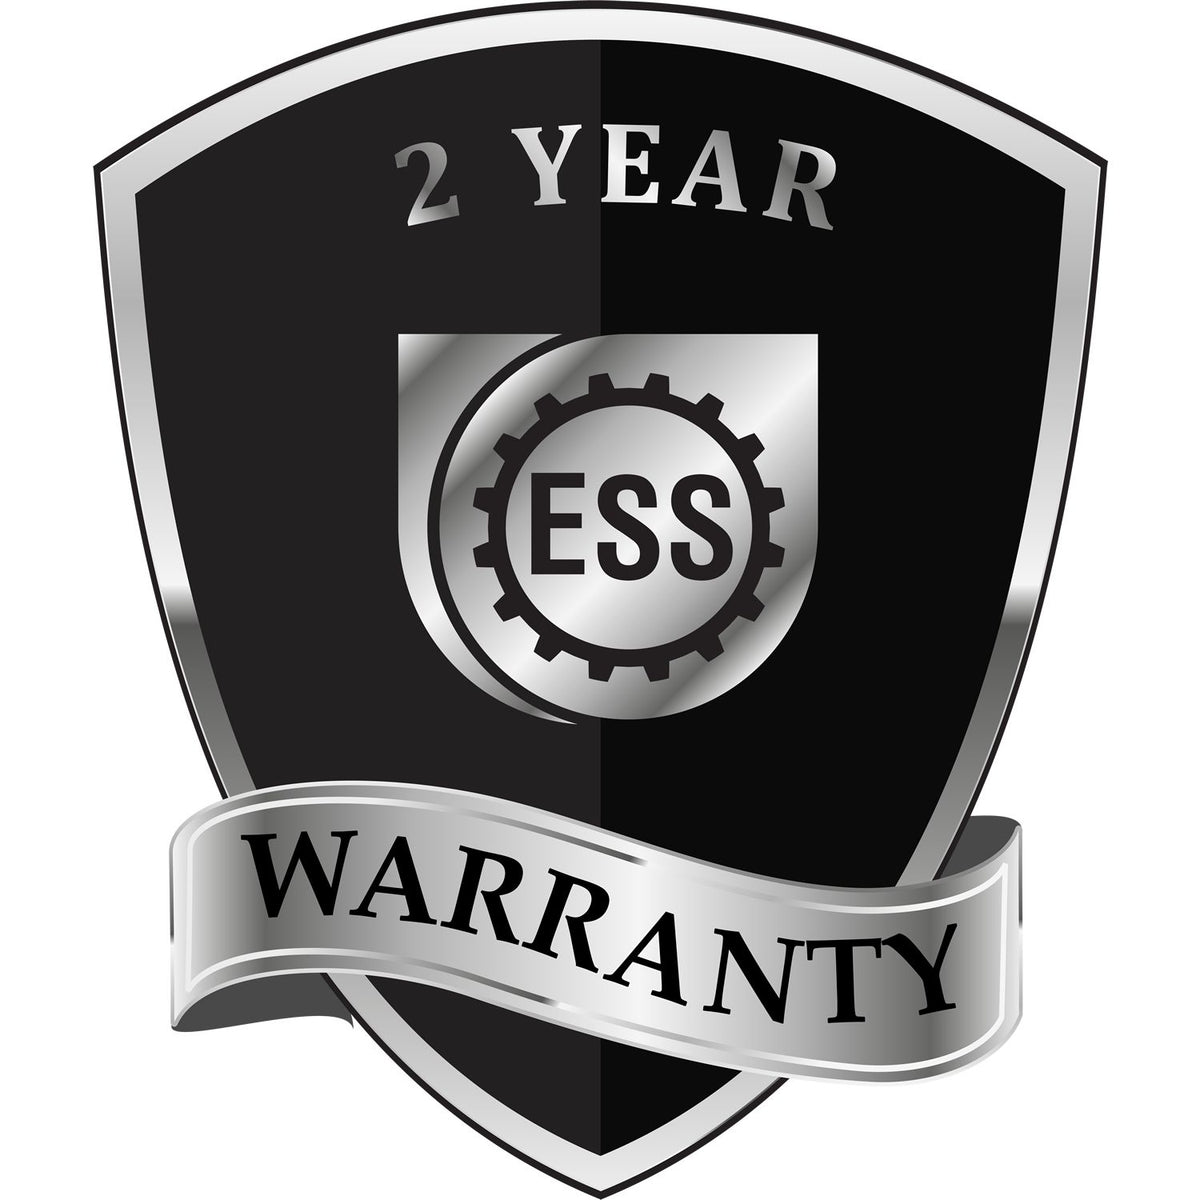 A black and silver badge or emblem showing warranty information for the Gift Mississippi Architect Seal